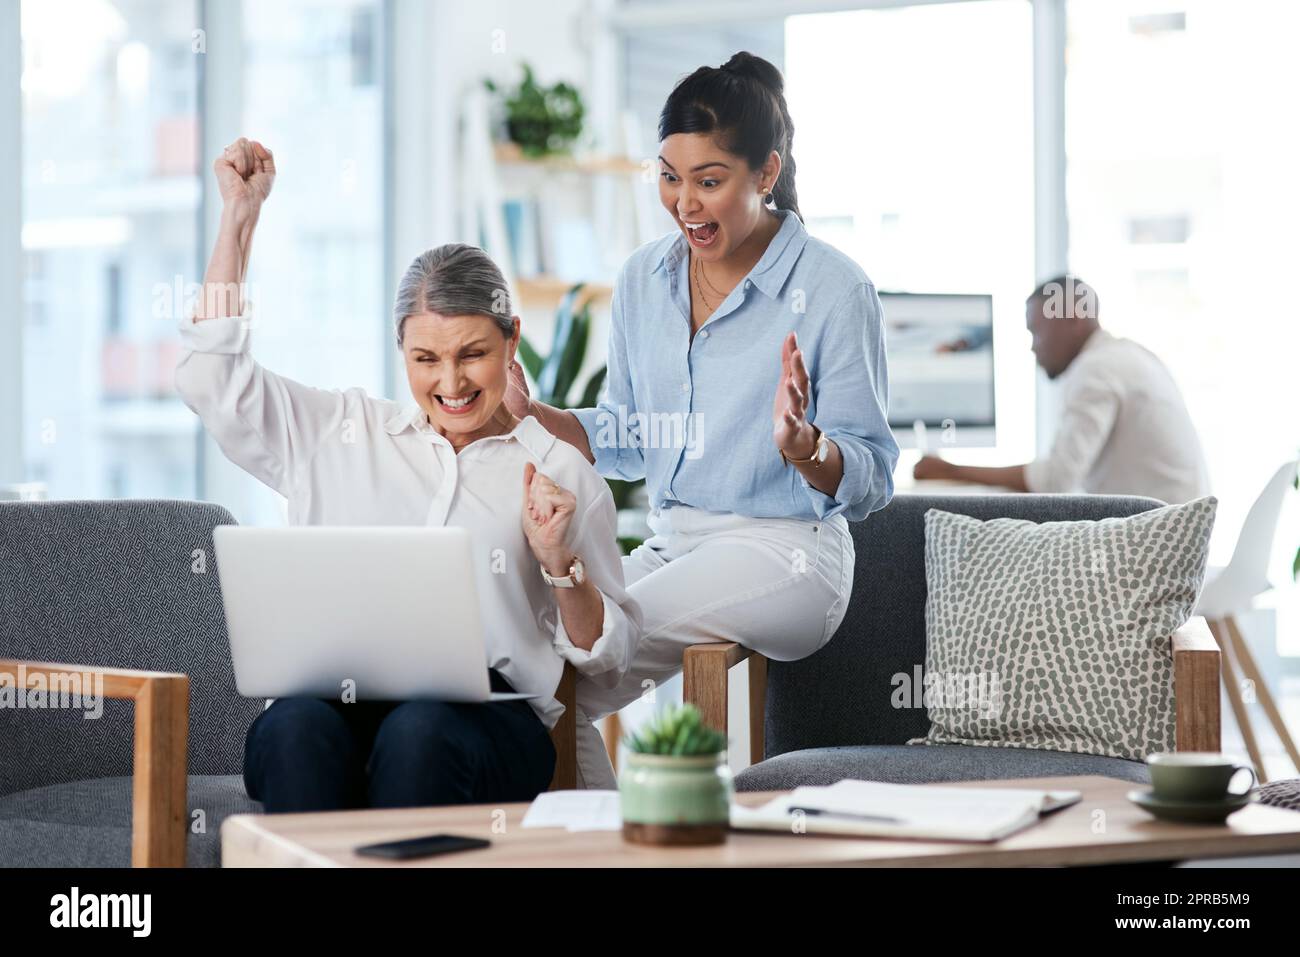 Theyre ecstatic to hear the good news. two businesswomen cheering while working together on a laptop in an office. Stock Photo